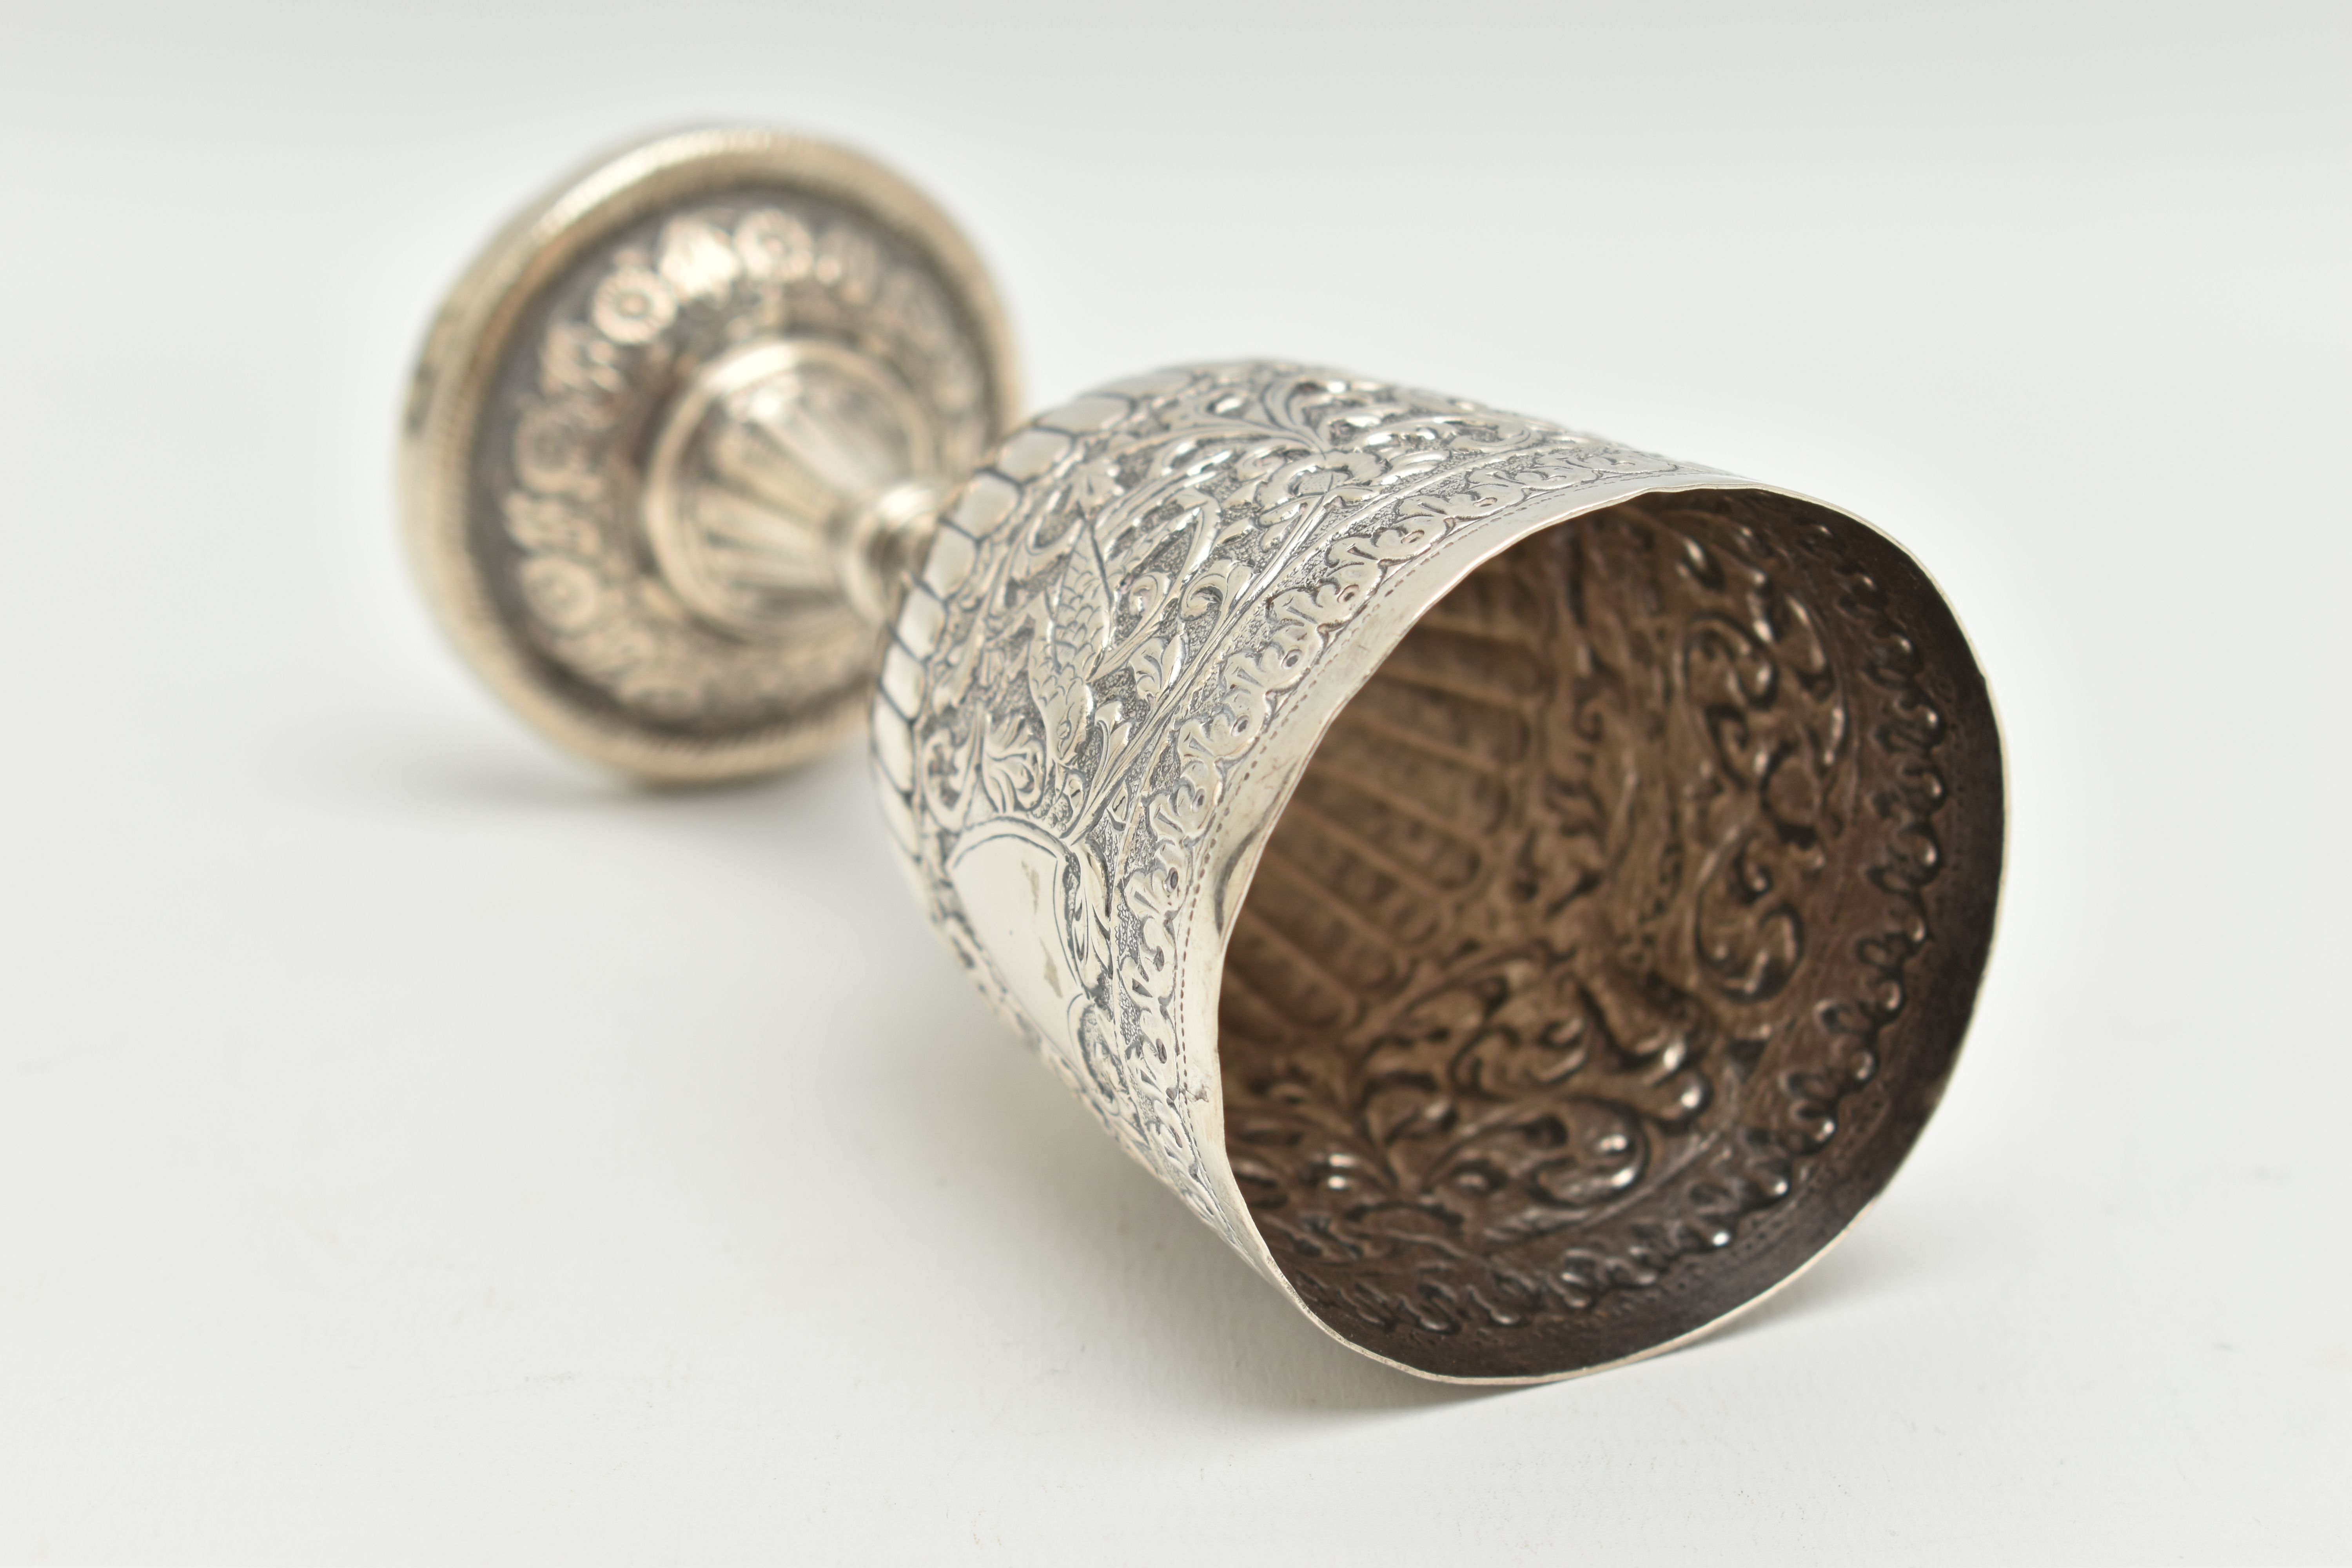 A LATE 19TH CENTURY INDIAN WHITE METAL GOBLET, repoussé decorated with foliate scrolls and birds, - Image 5 of 6